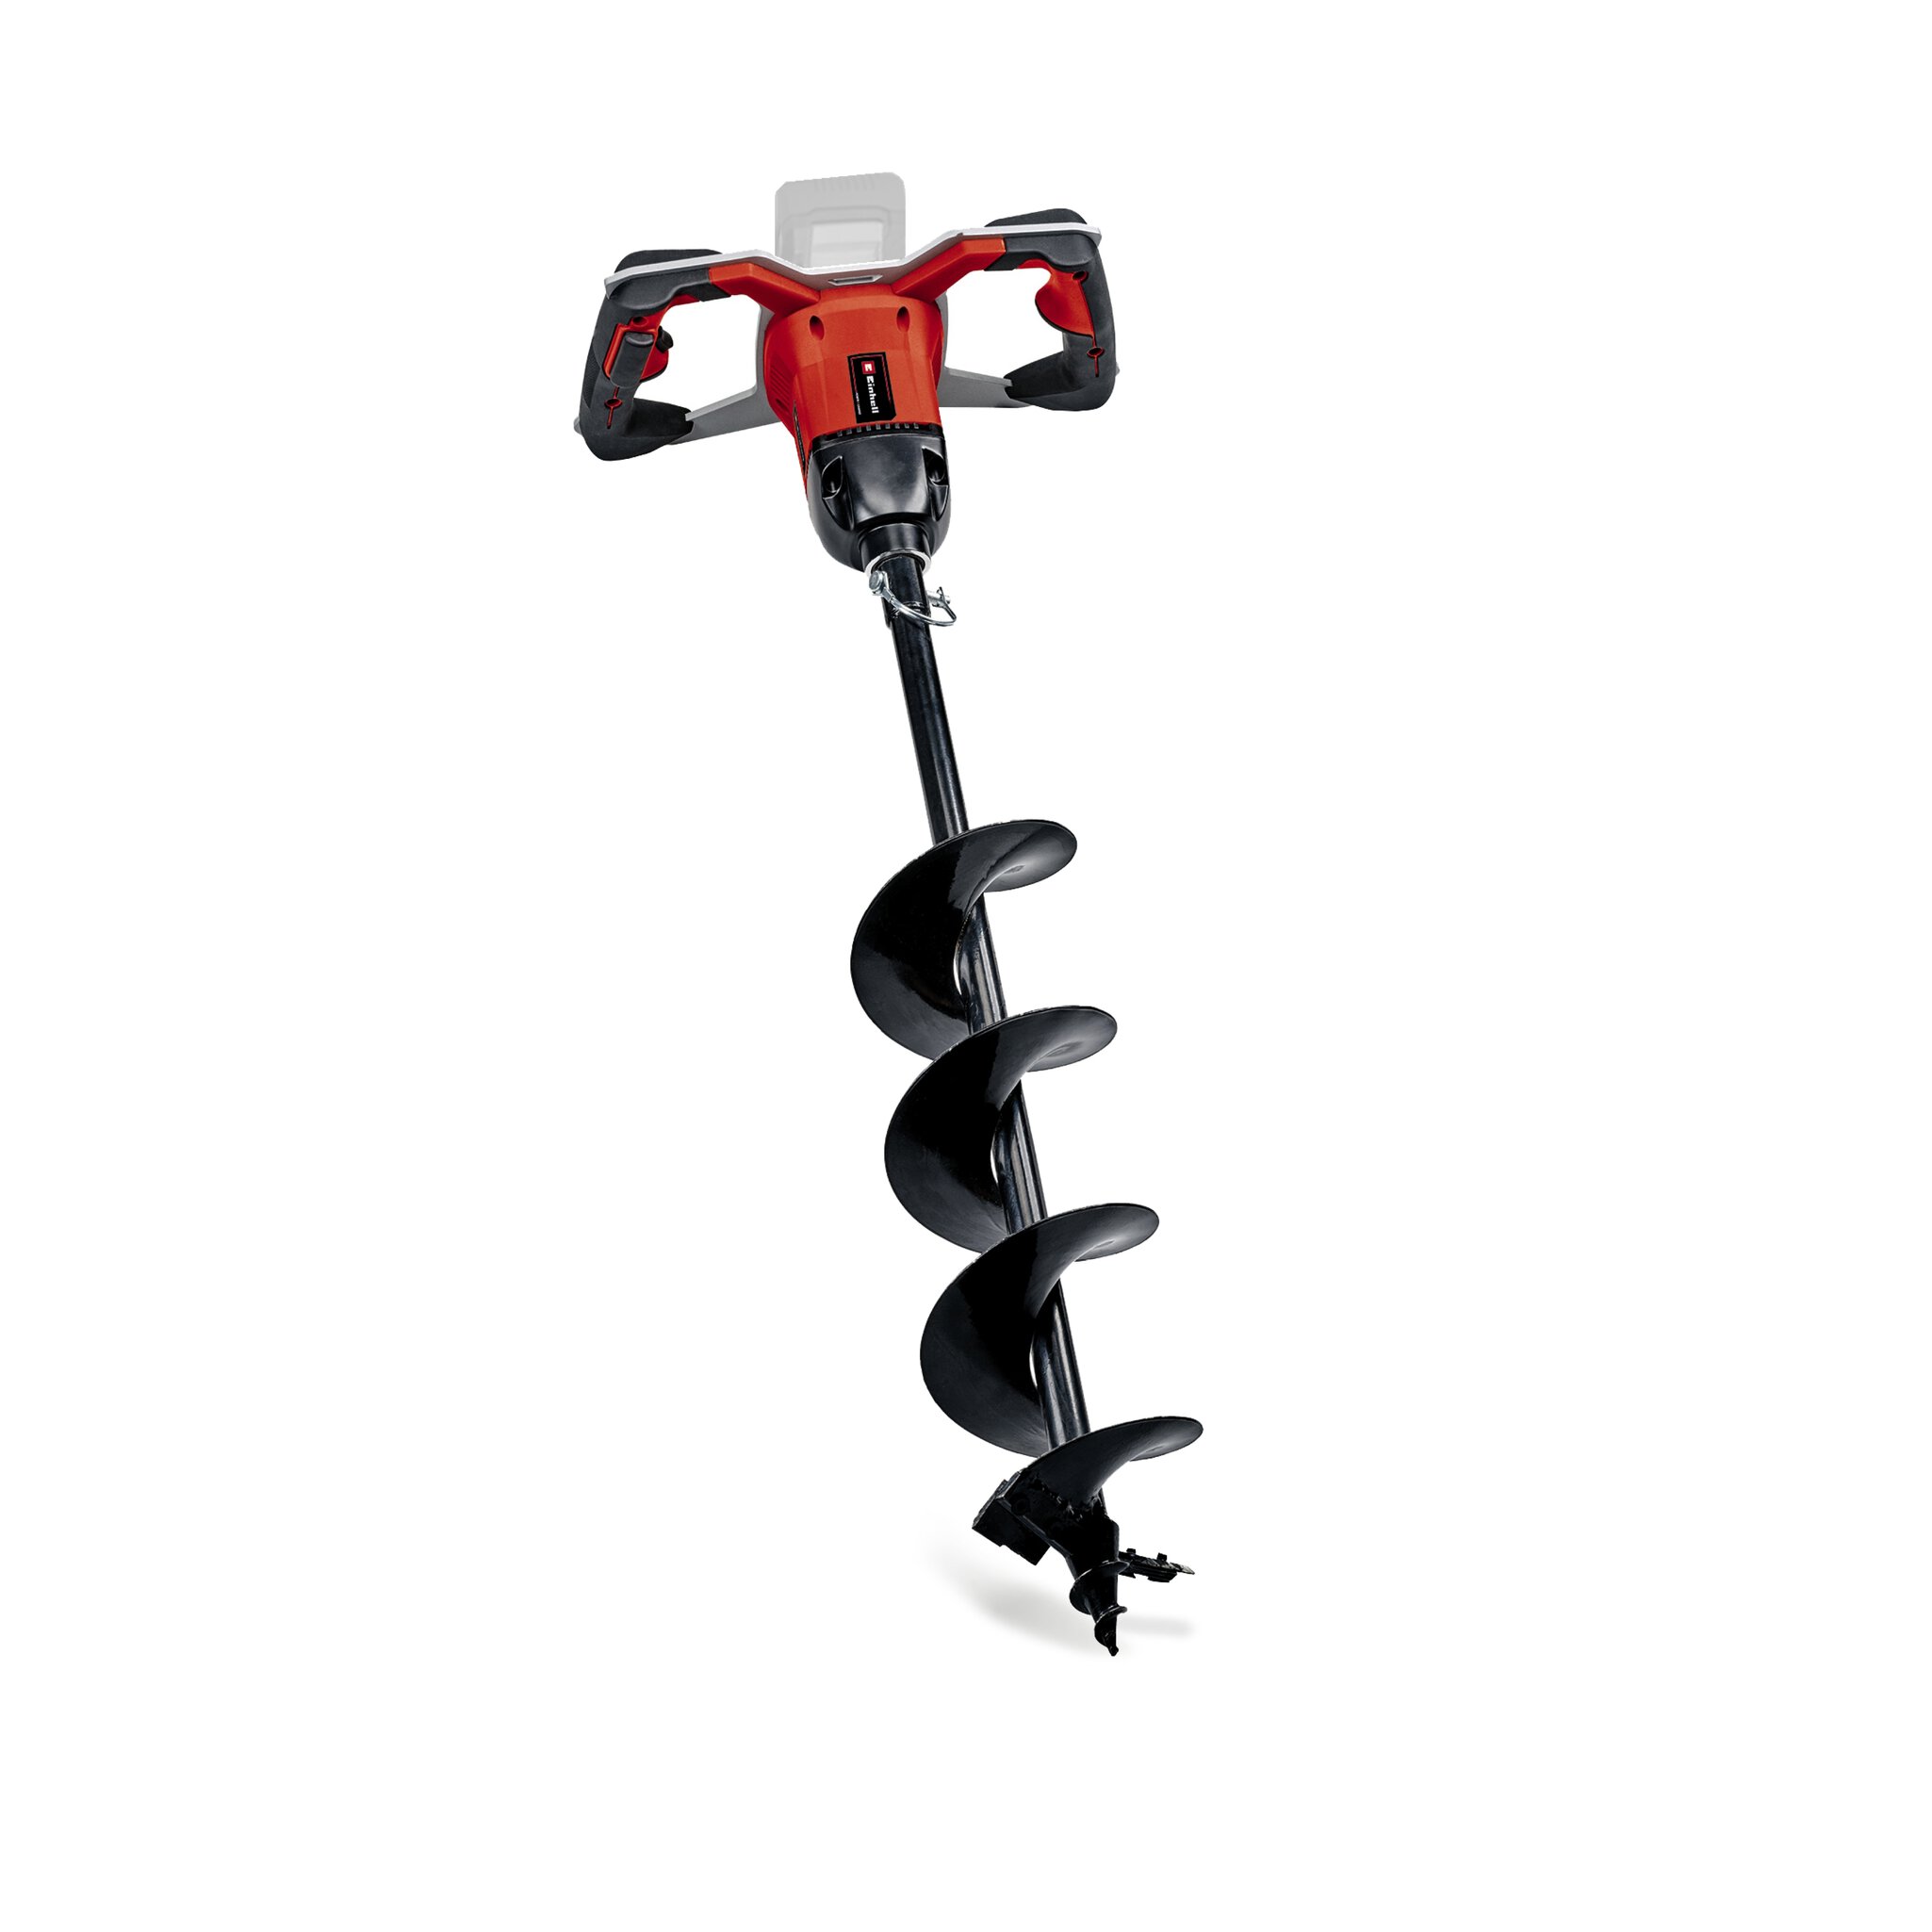 einhell-professional-cordless-earth-auger-3437000-productimage-001